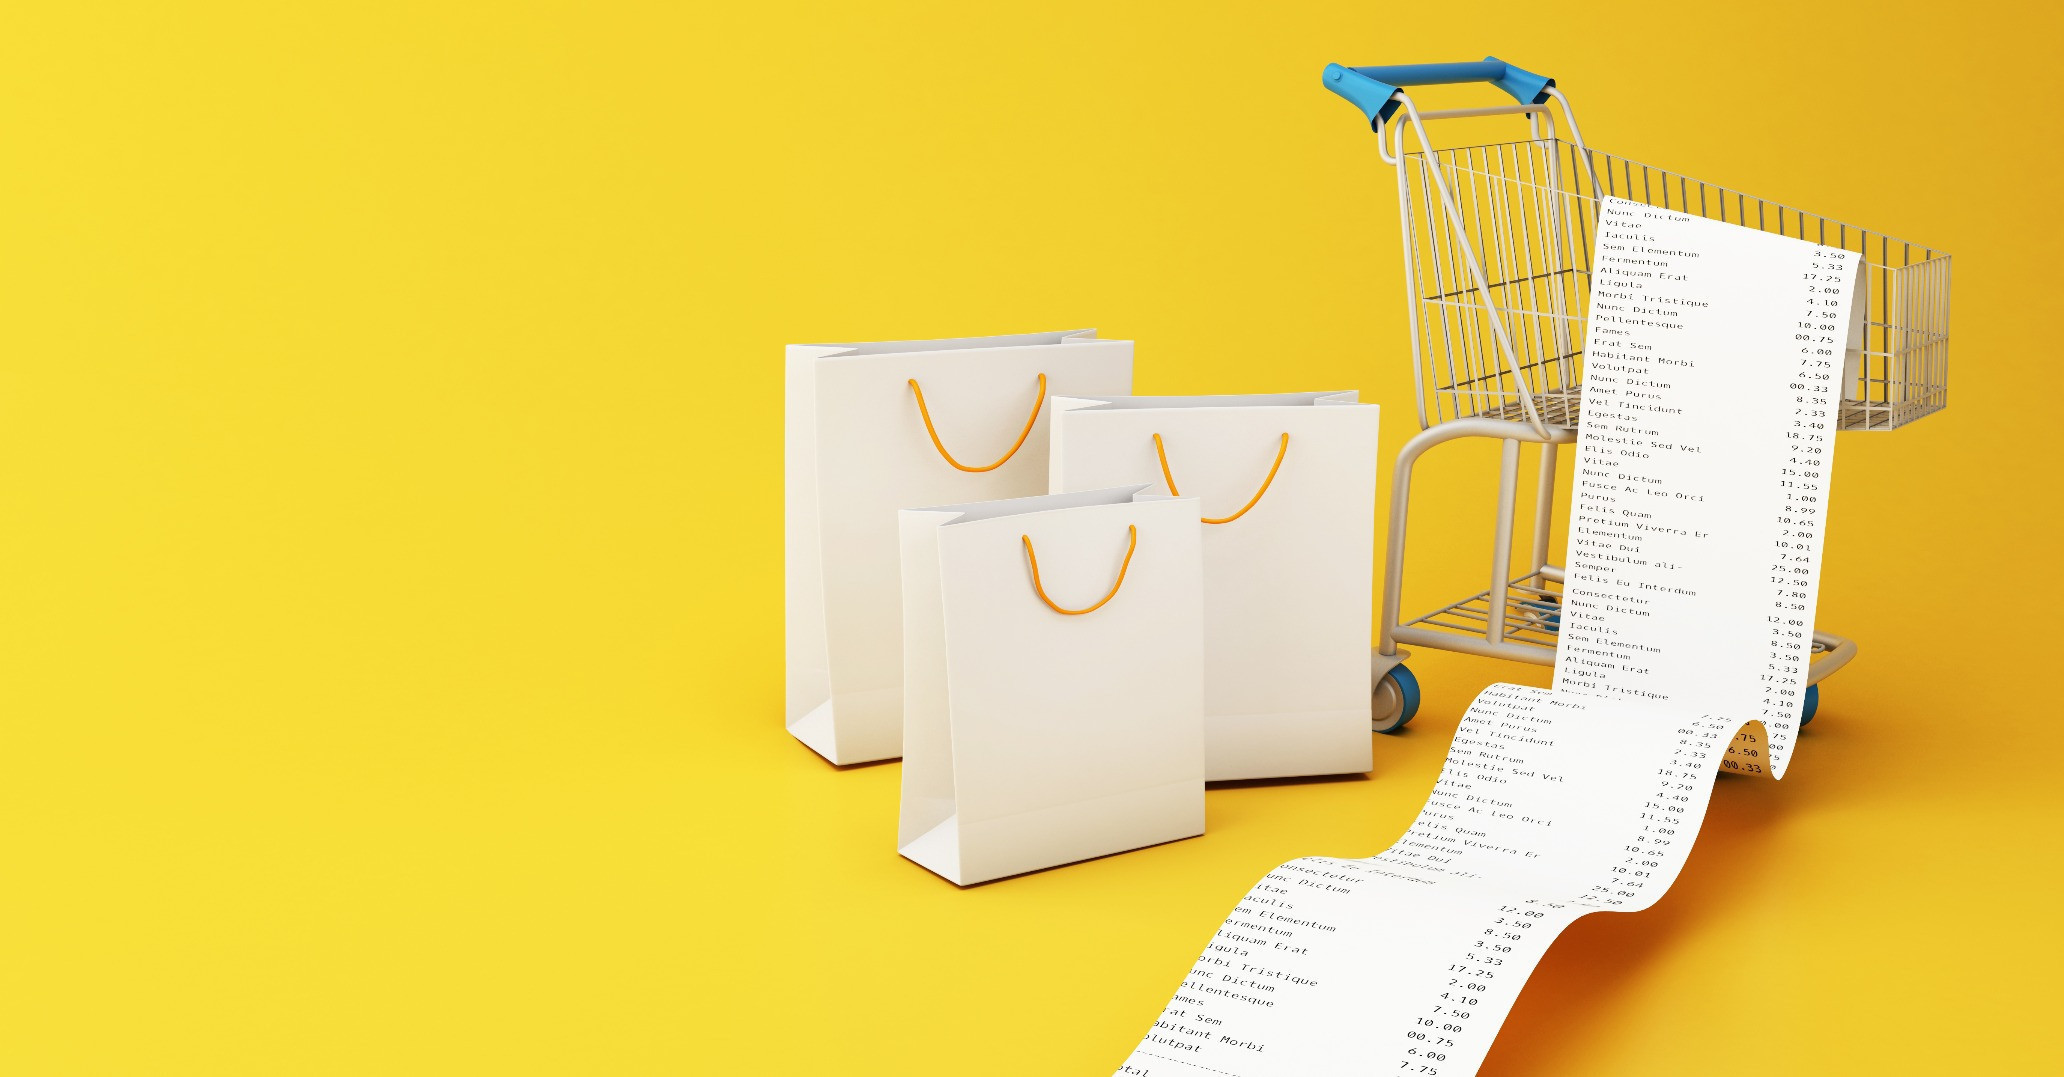 3d-bags-and-shopping-cart-with-store-receipt-2021-08-28-23-53-10-utc___media_library_original_2064_1077